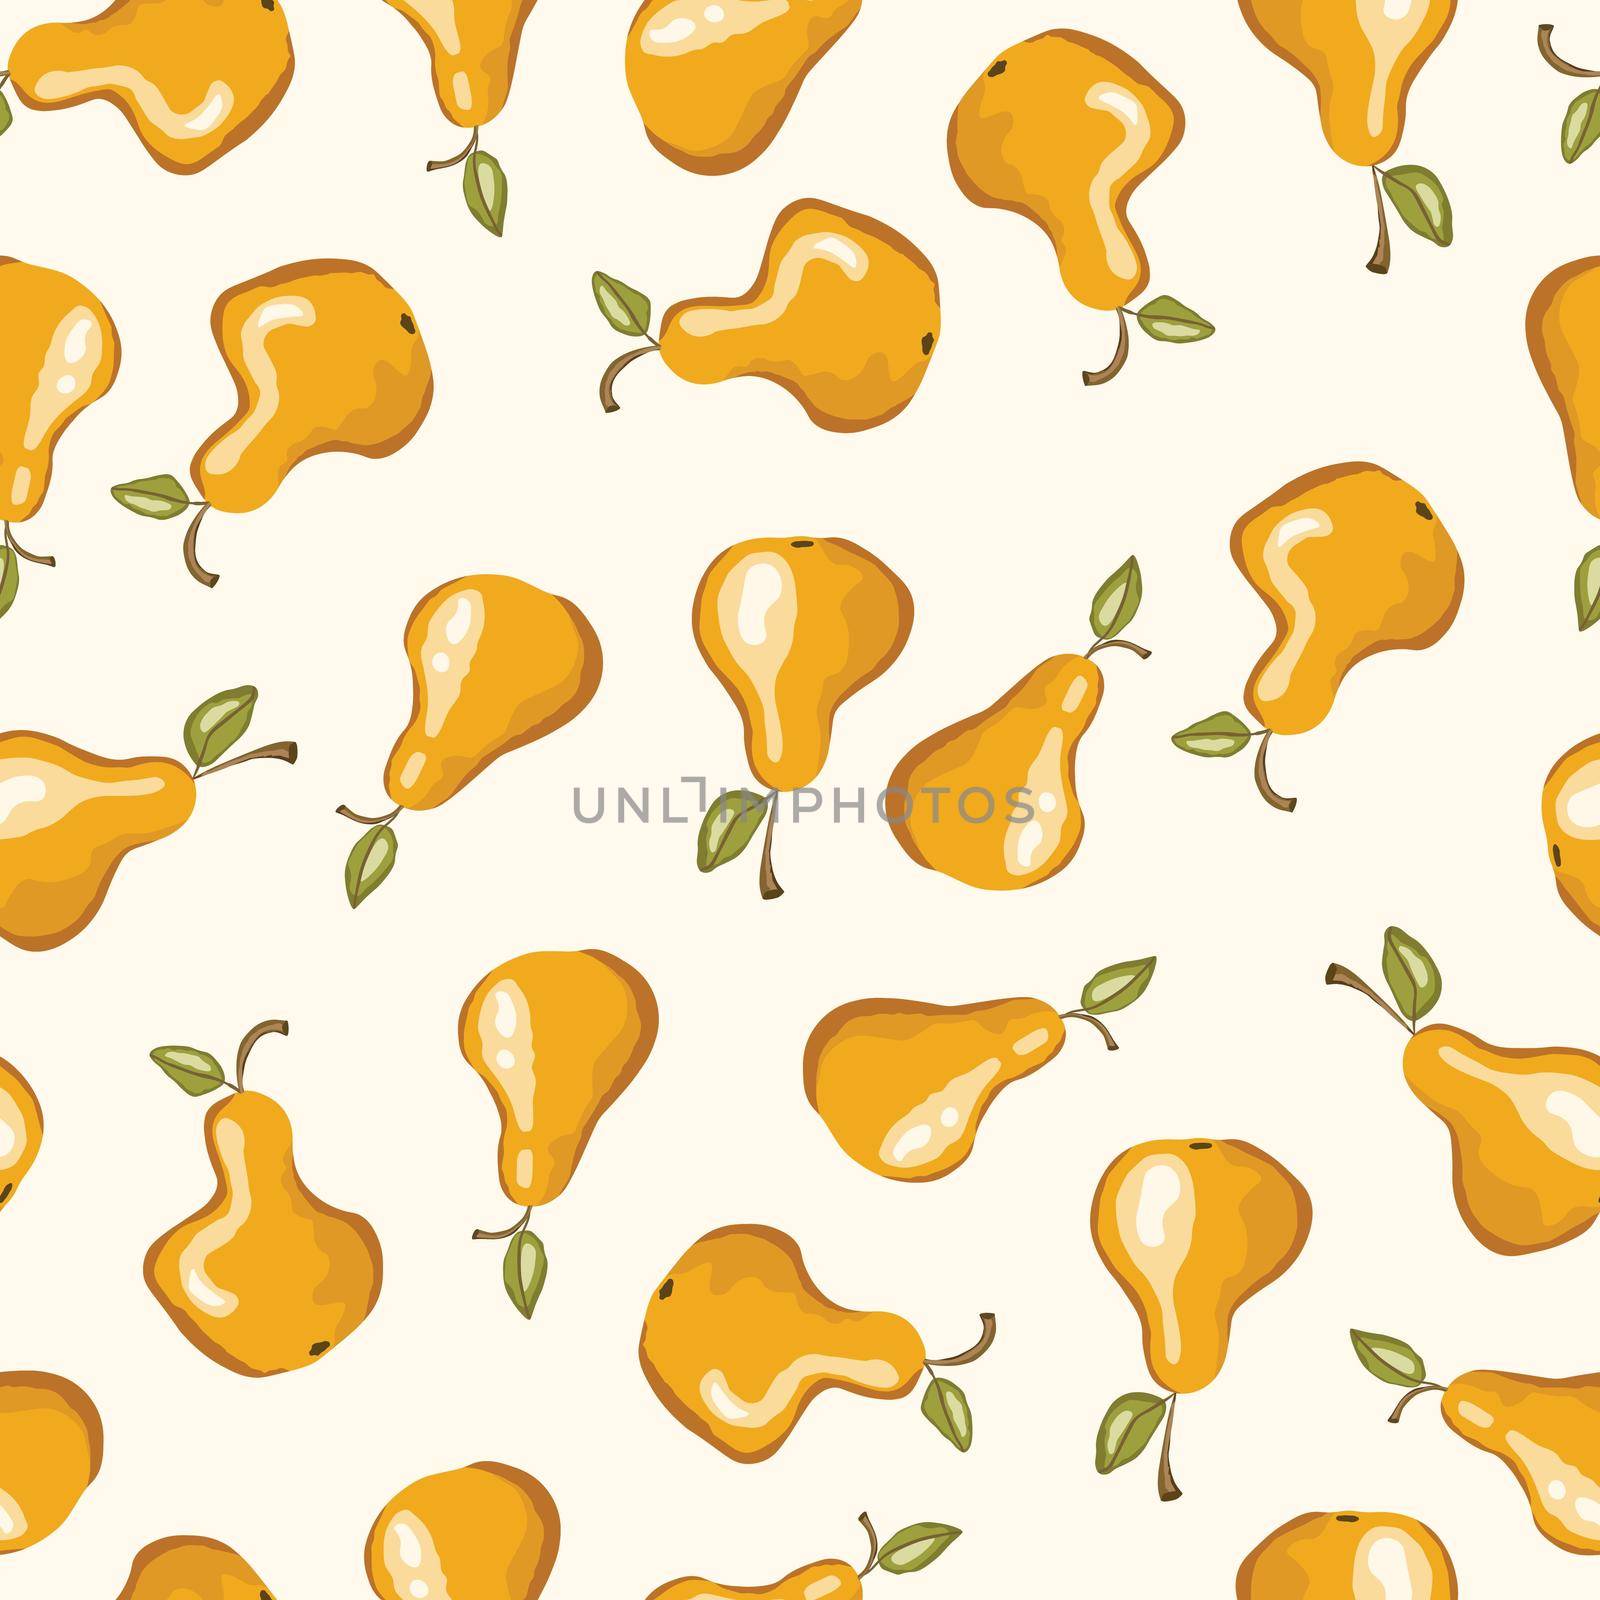 Seamless pattern with pear on white background. Natural delicious fresh ripe tasty fruit. Vector illustration for print, fabric, textile, banner, other design. Stylized pears with leaves.Food concept.